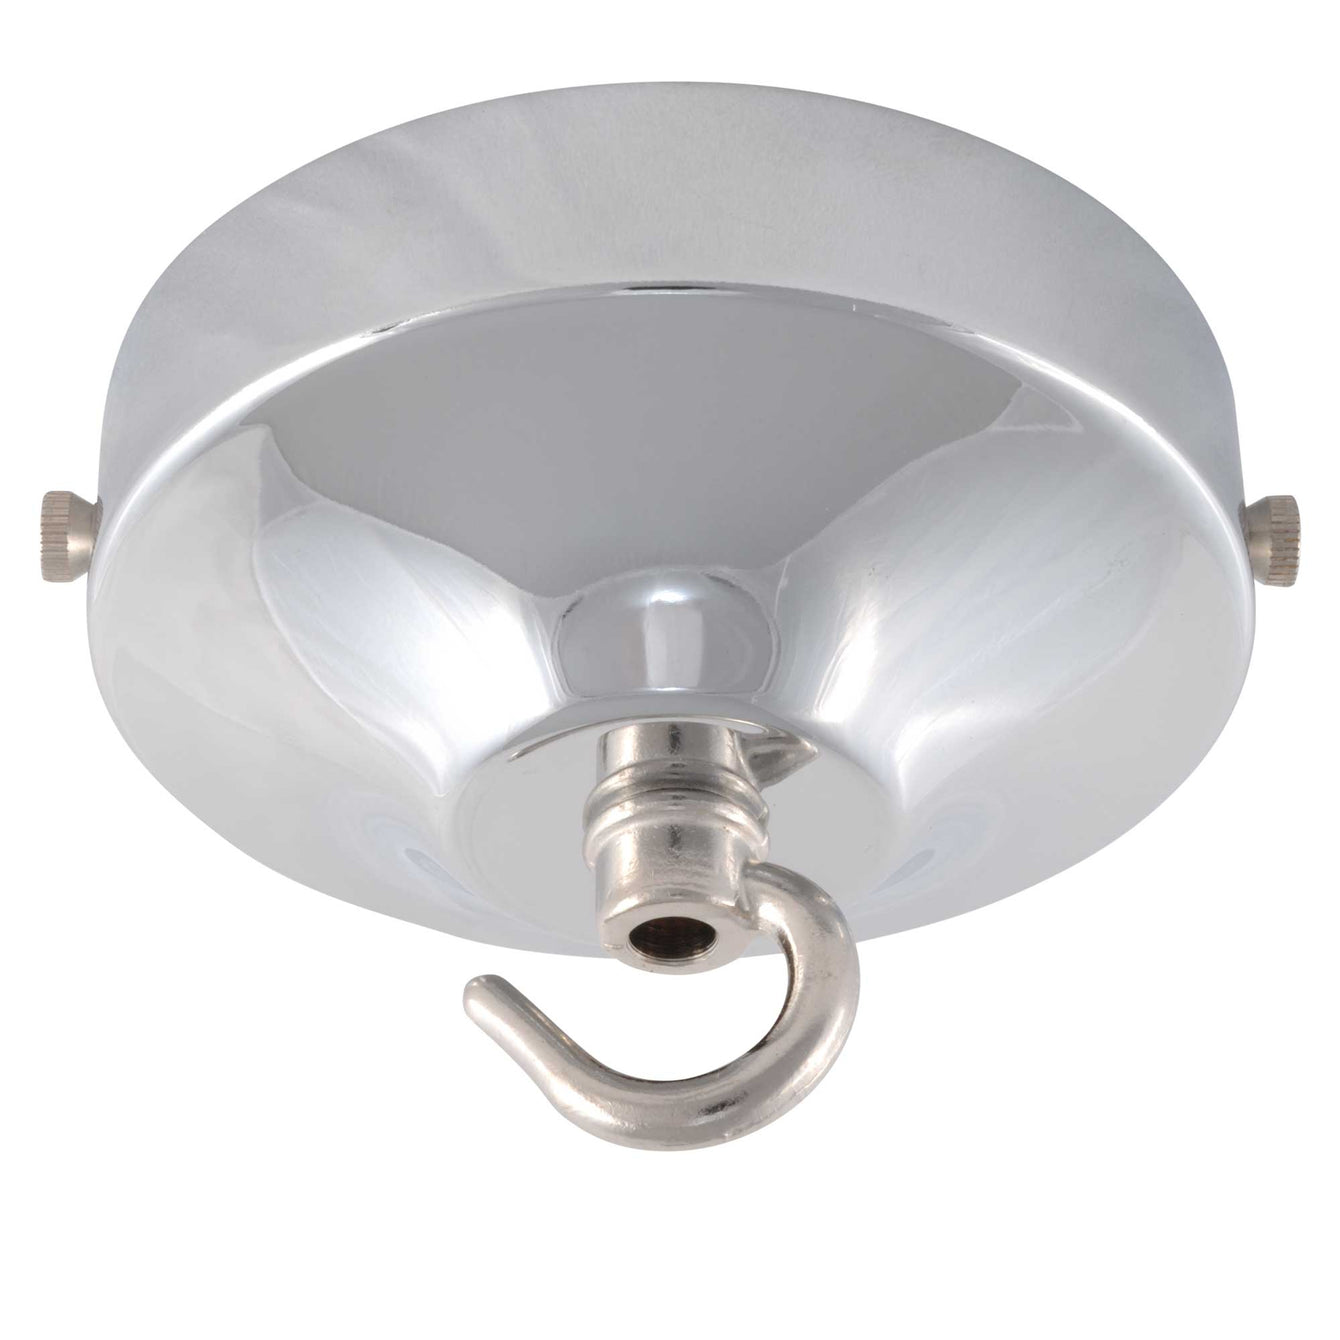 ElekTek 100mm Diameter Convex Ceiling Rose with Strap Bracket and Hook Metallic and Powder Coated Finishes Willow Green